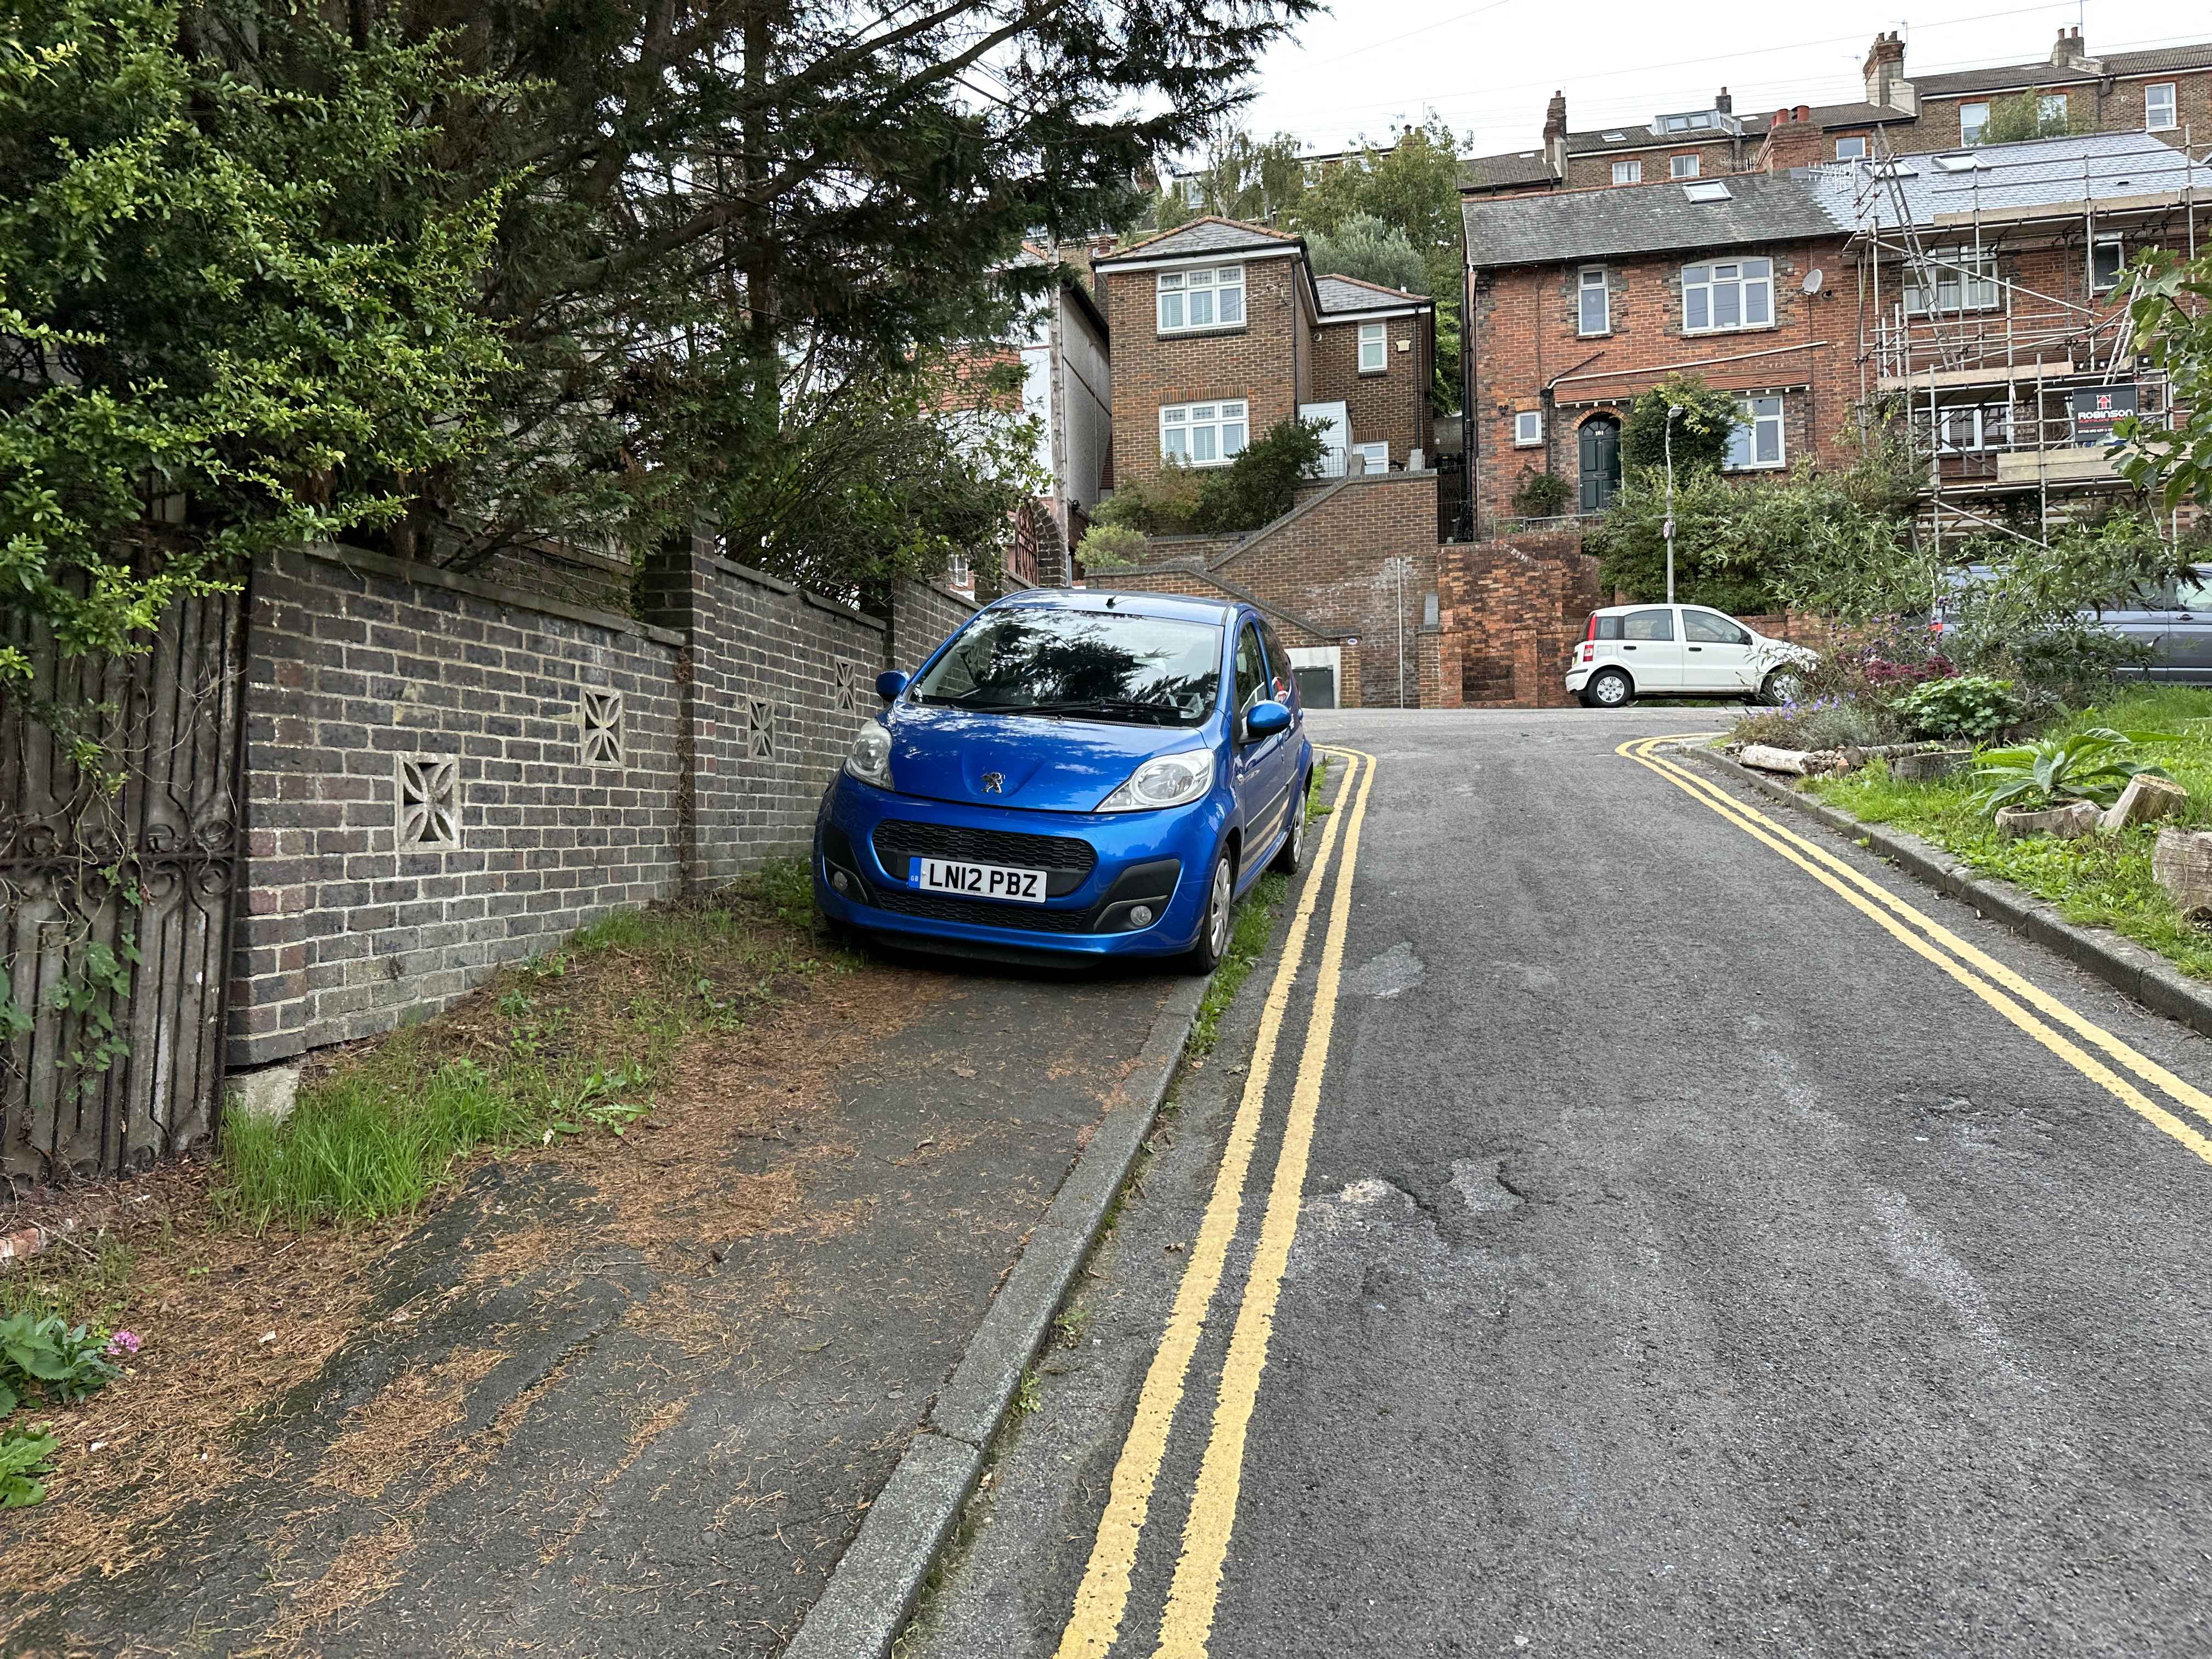 Photograph of LN12 PBZ - a Blue Peugeot 107 parked in Hollingdean by a non-resident. The second of six photographs supplied by the residents of Hollingdean.